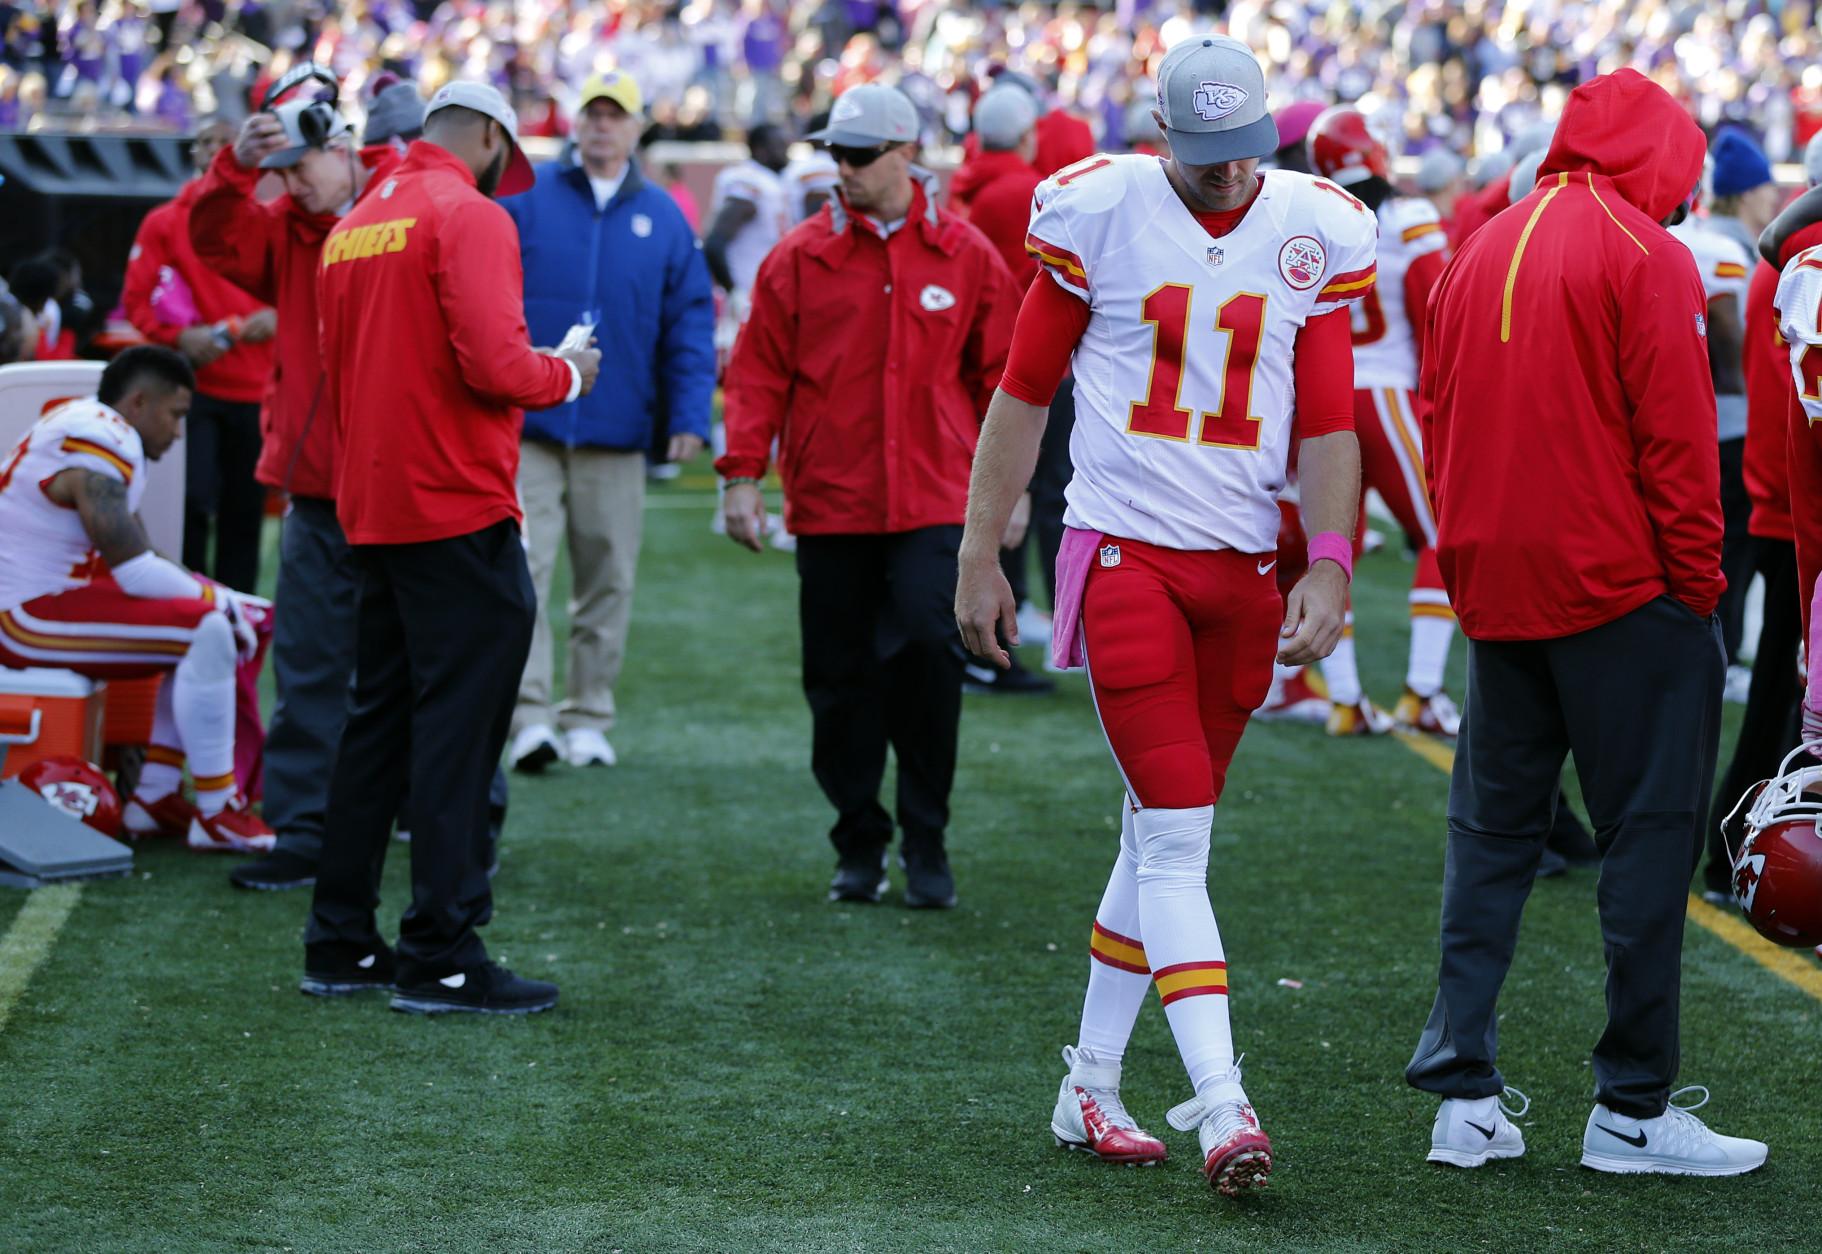 Kansas City Chiefs quarterback Alex Smith (11) walks on the sidelines during the second half of an NFL football game against the Minnesota Vikings, Sunday, Oct. 18, 2015, in Minneapolis. The Vikings won 16-10. (AP Photo/Jim Mone)